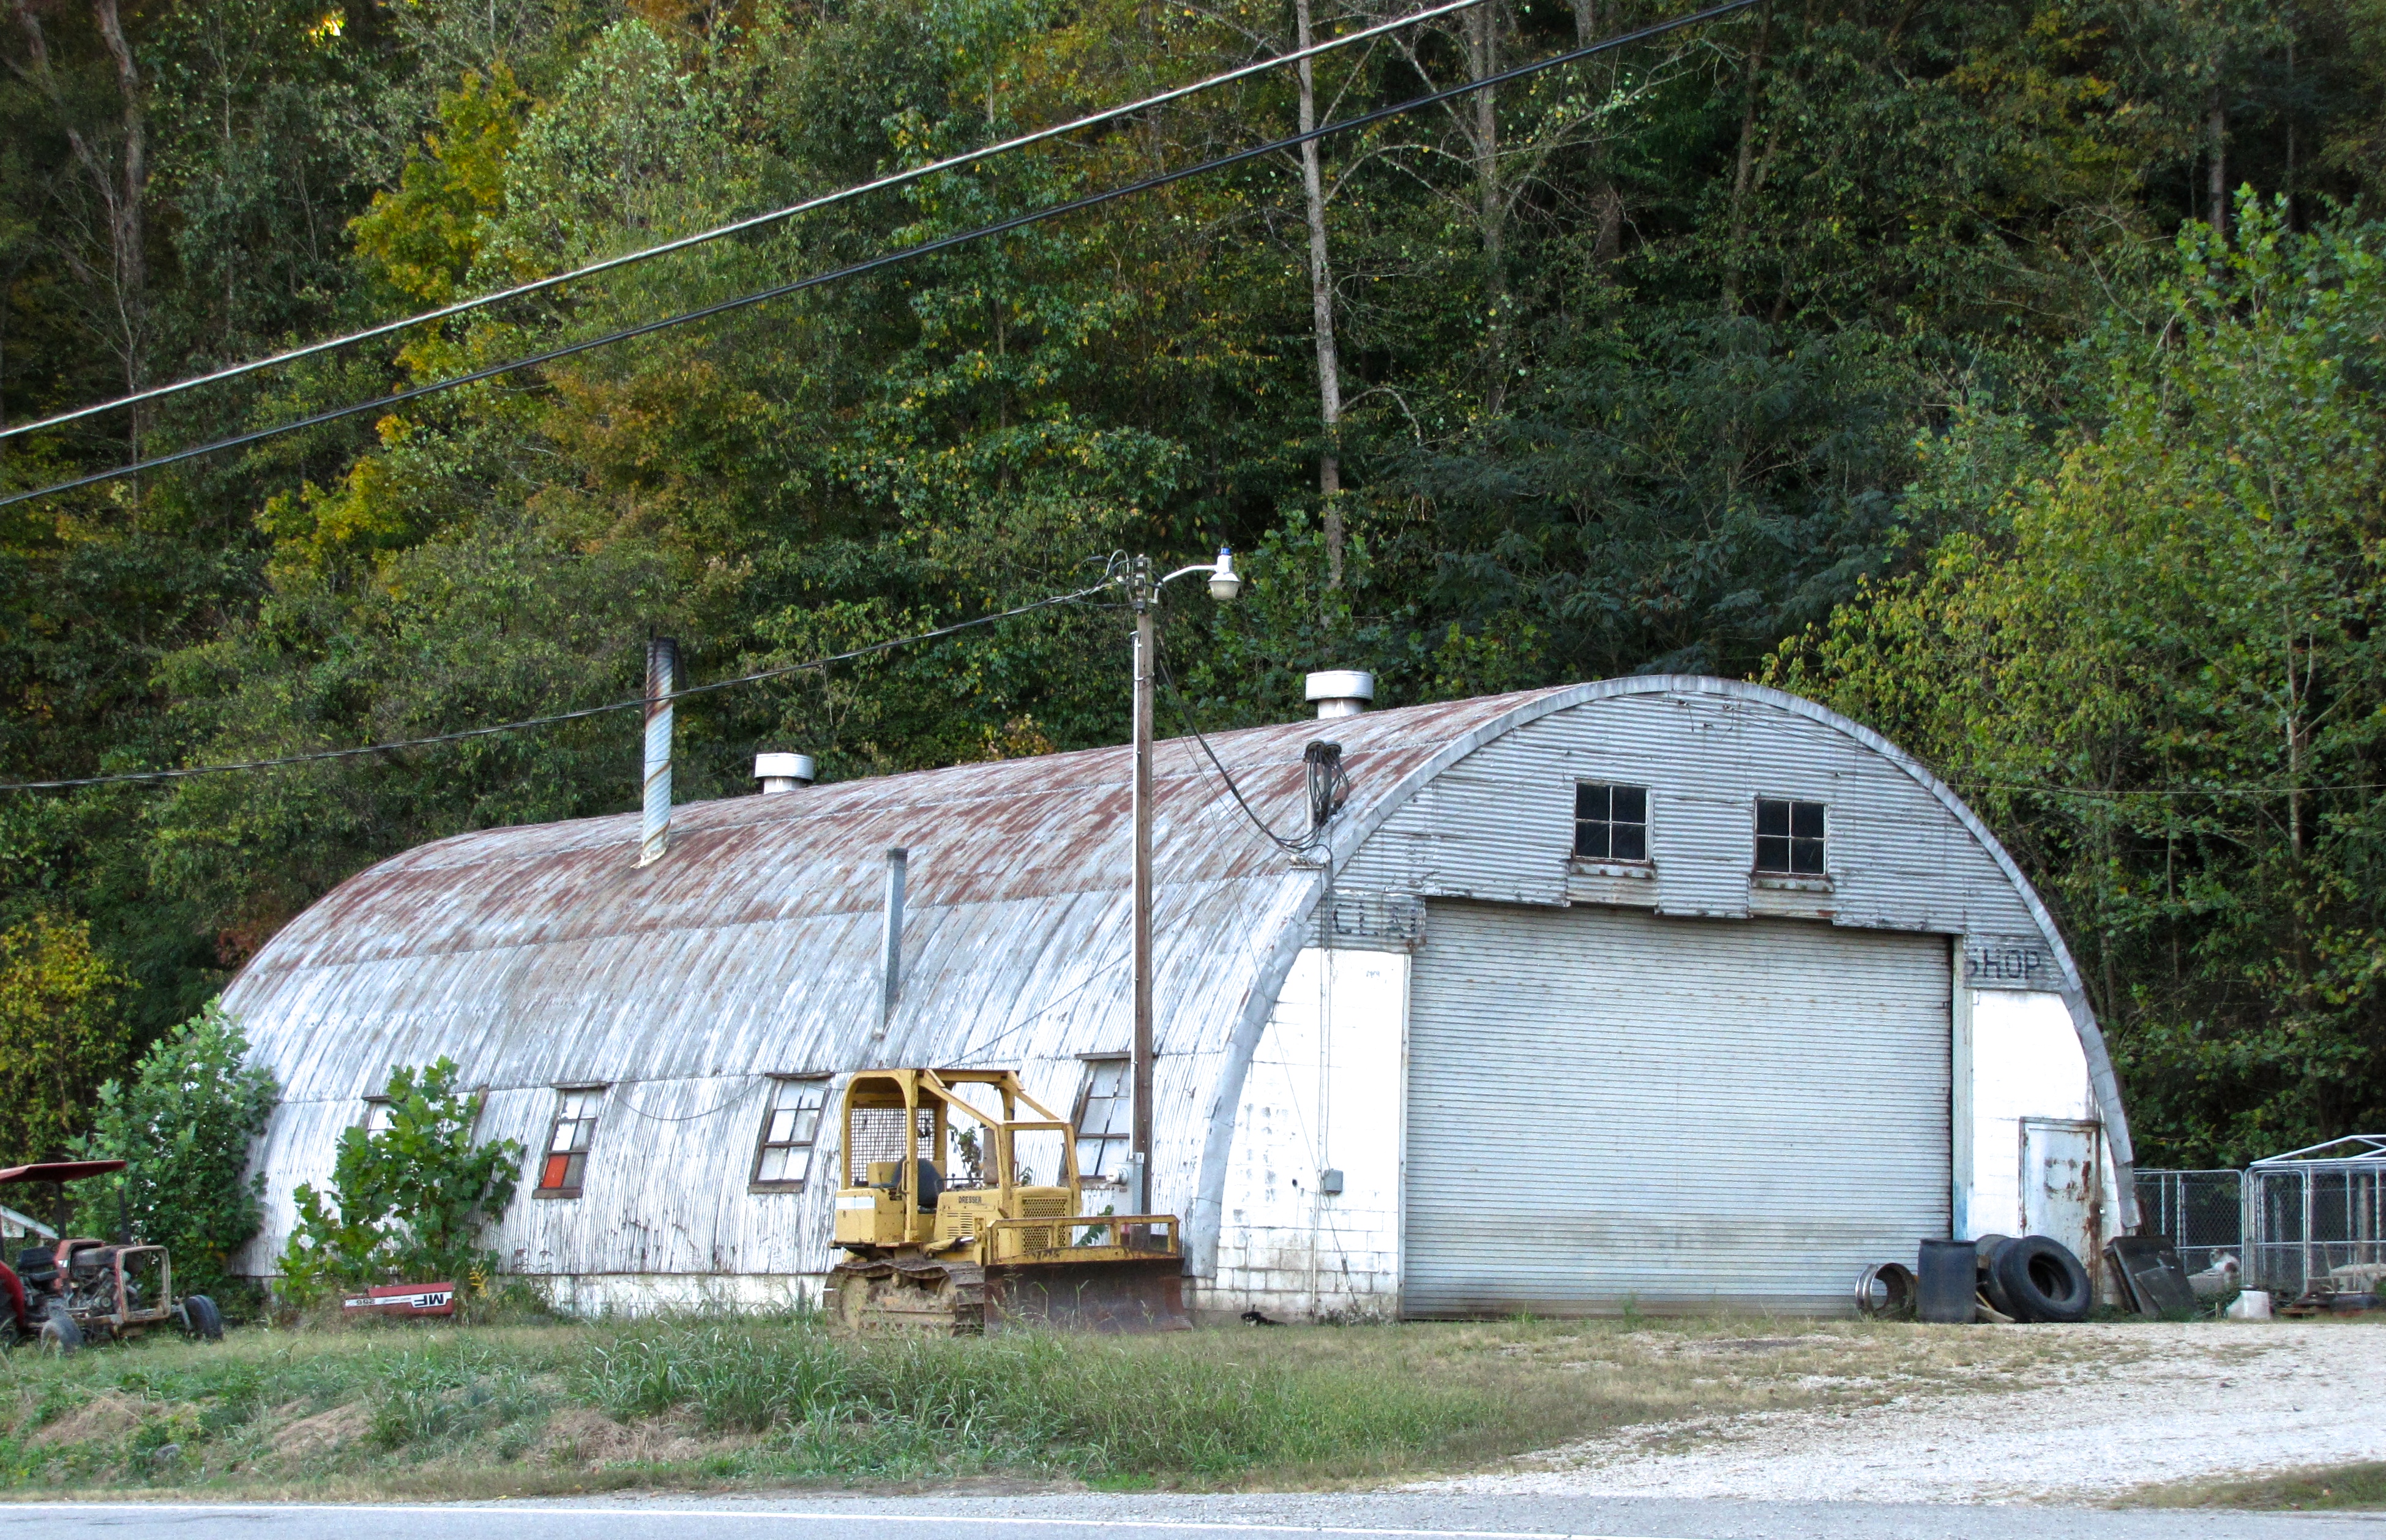 quonset hut in Louisville, KY